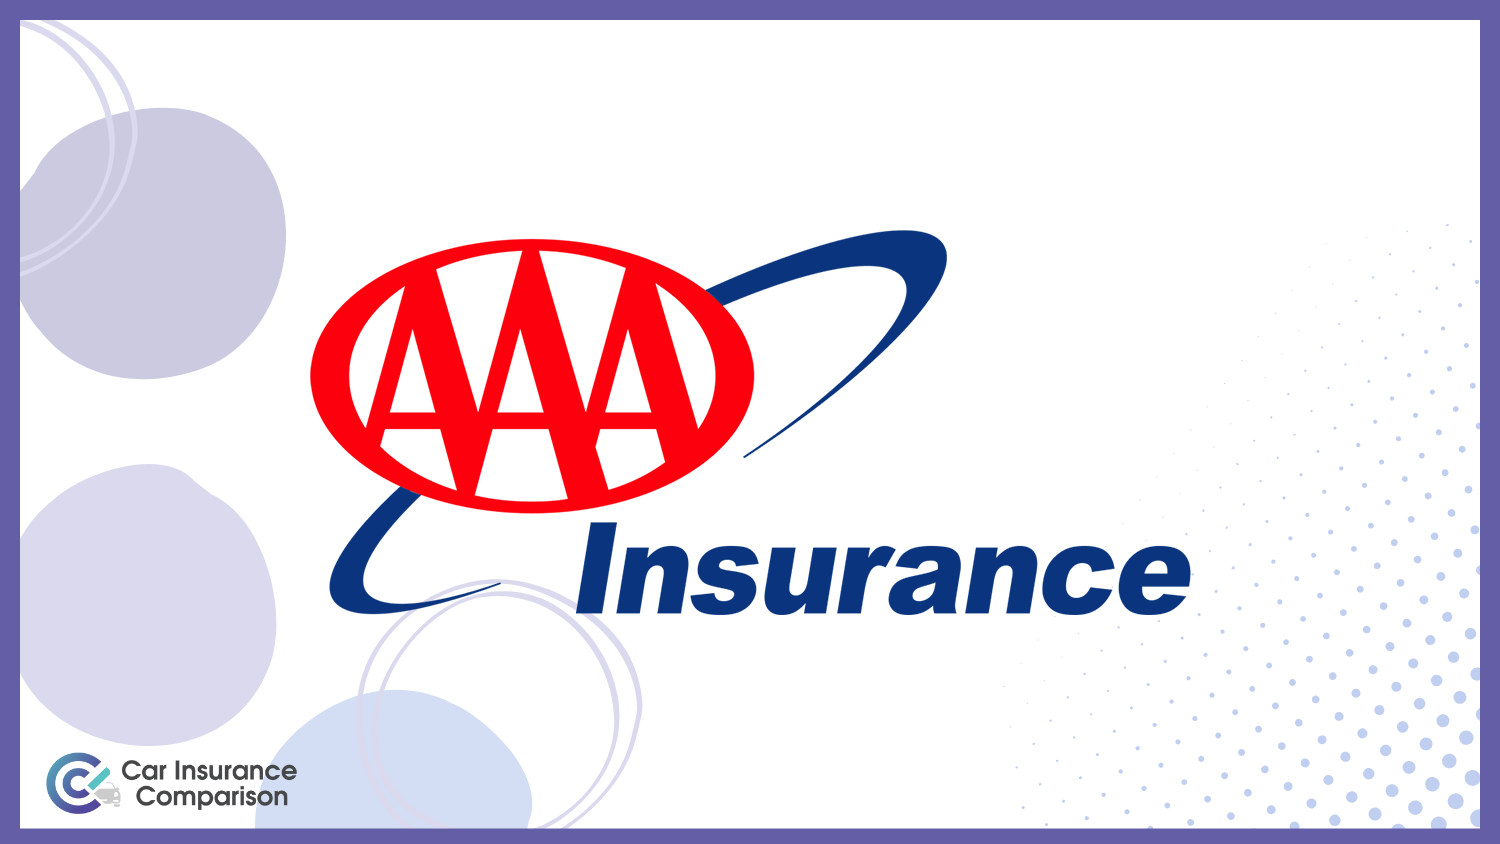 AAA: Best Car Insurance for a Revoked Driver’s License